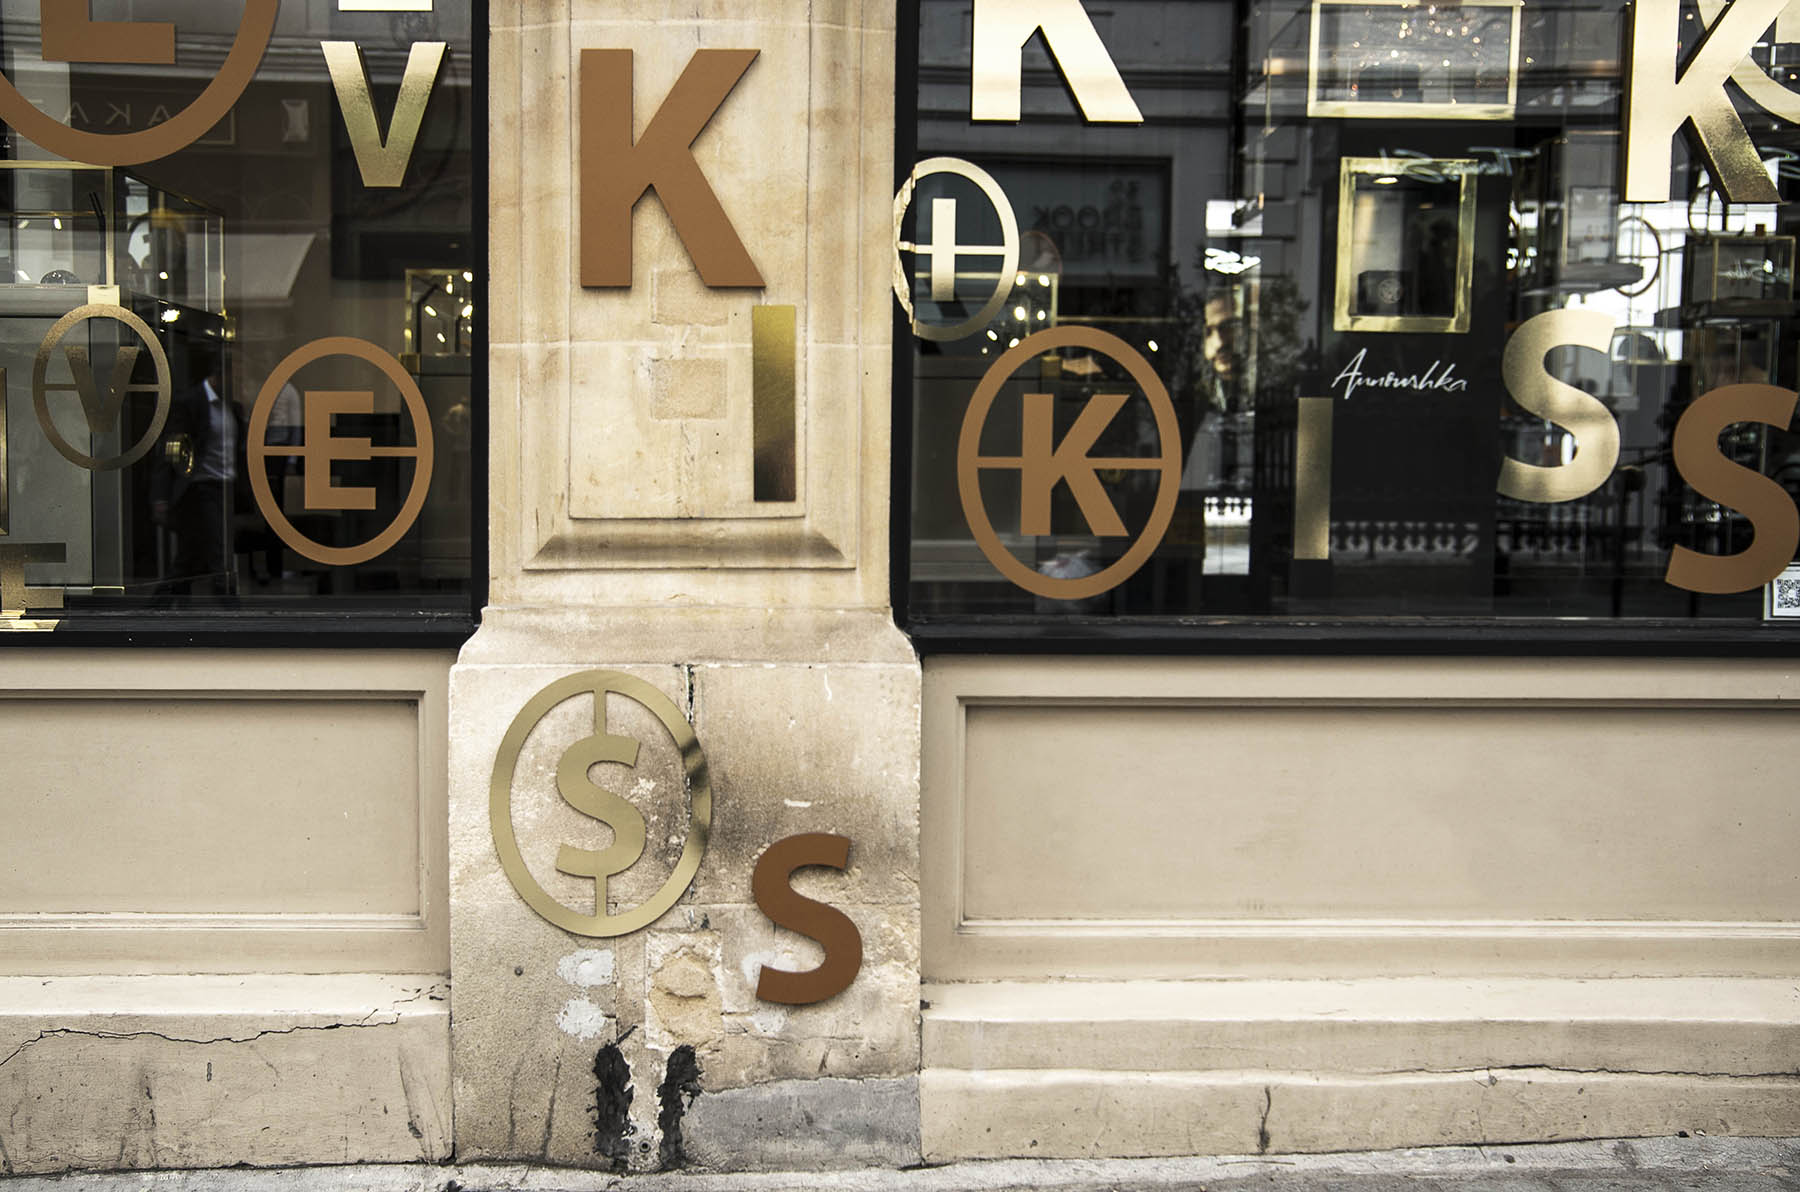 Annoushka Initials window display - gold and copper letters spelling Kiss on wall and windows 